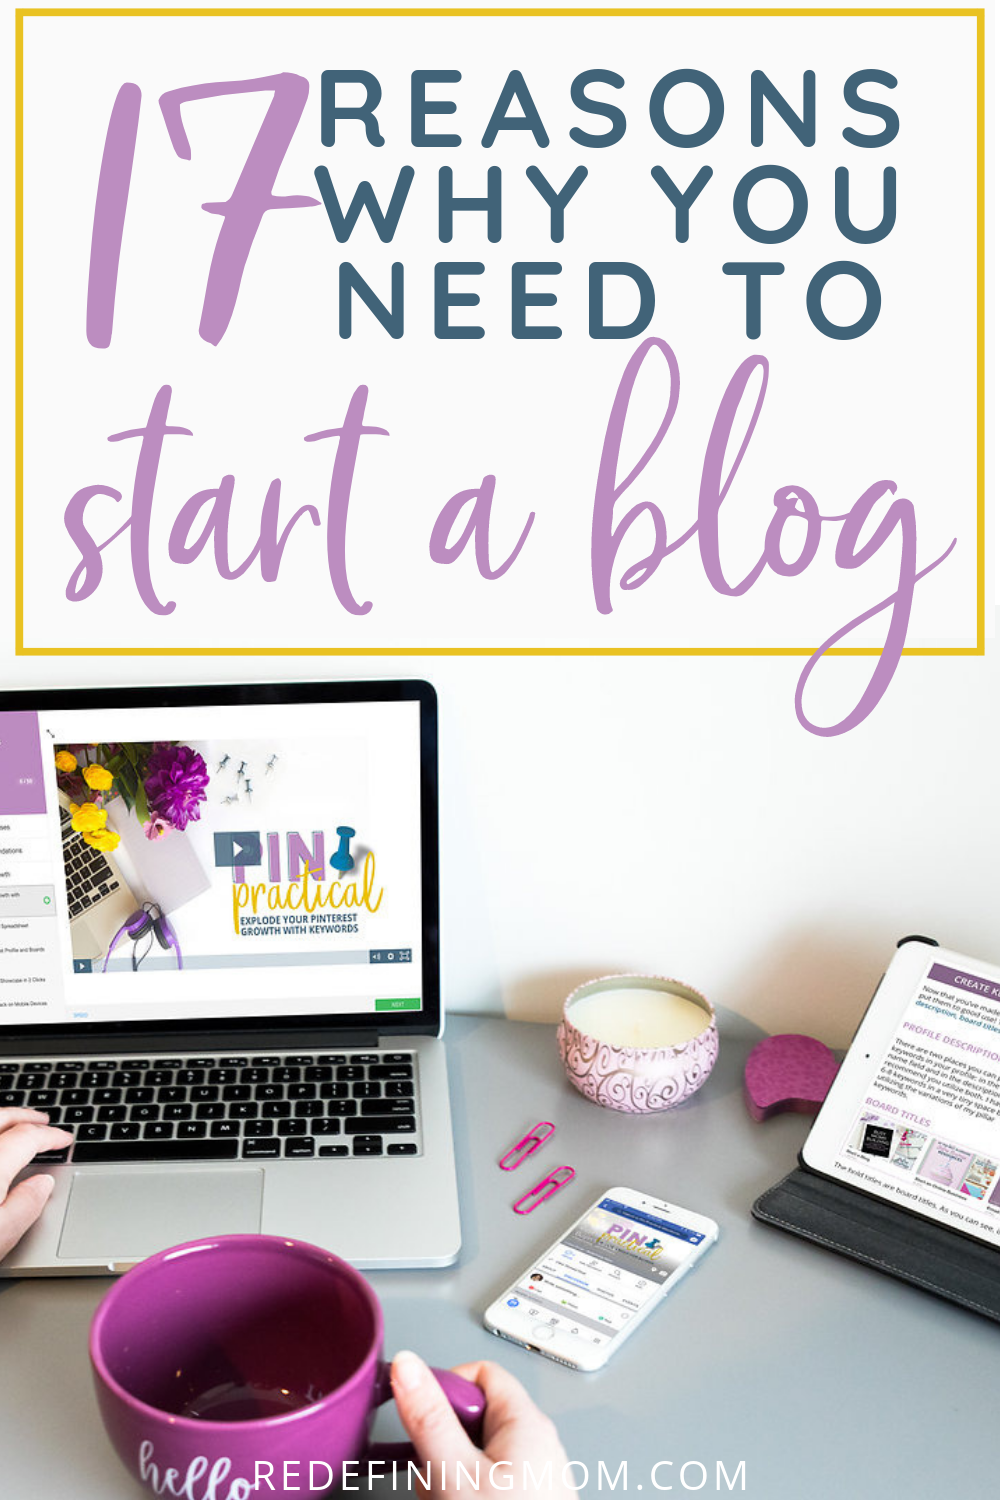 Step-by-step instructions on how to start a blog and make money from home in under 20 minutes! How to start a blog for free / how to start a blog for beginners / start a mom blog / blogging for beginners in 2018 / start an online business in 2019